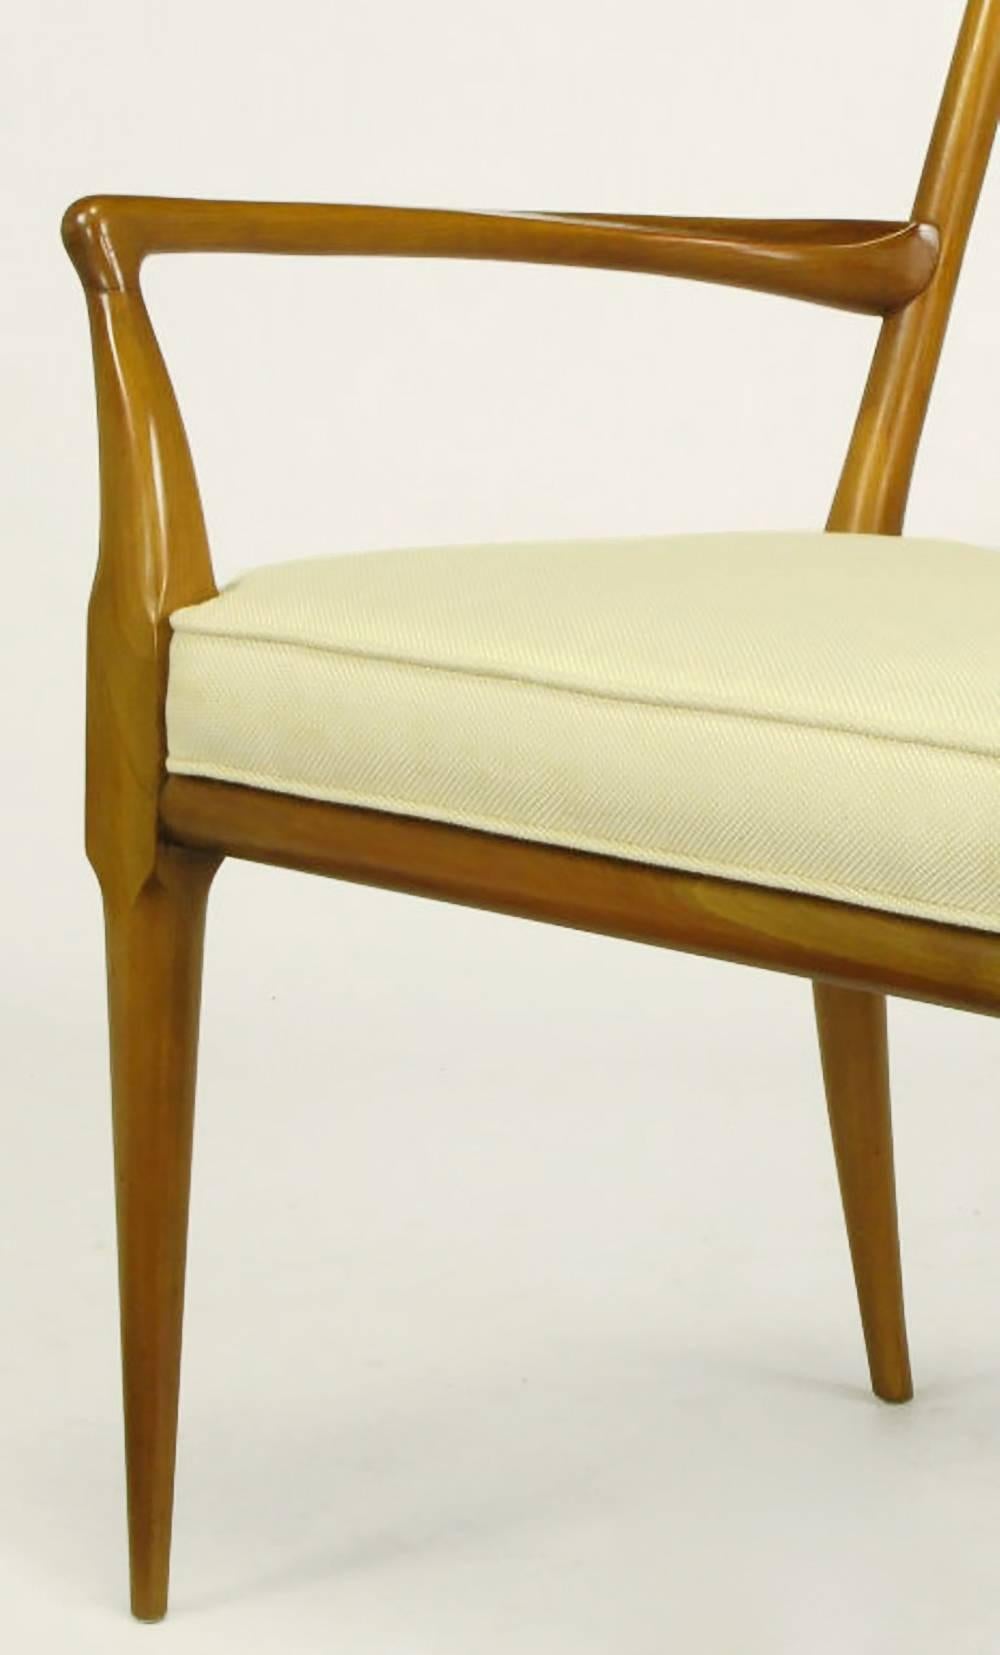 Mid-20th Century Pair of Bert England Sculpted Walnut and Off-White Linen Slatback Armchairs For Sale